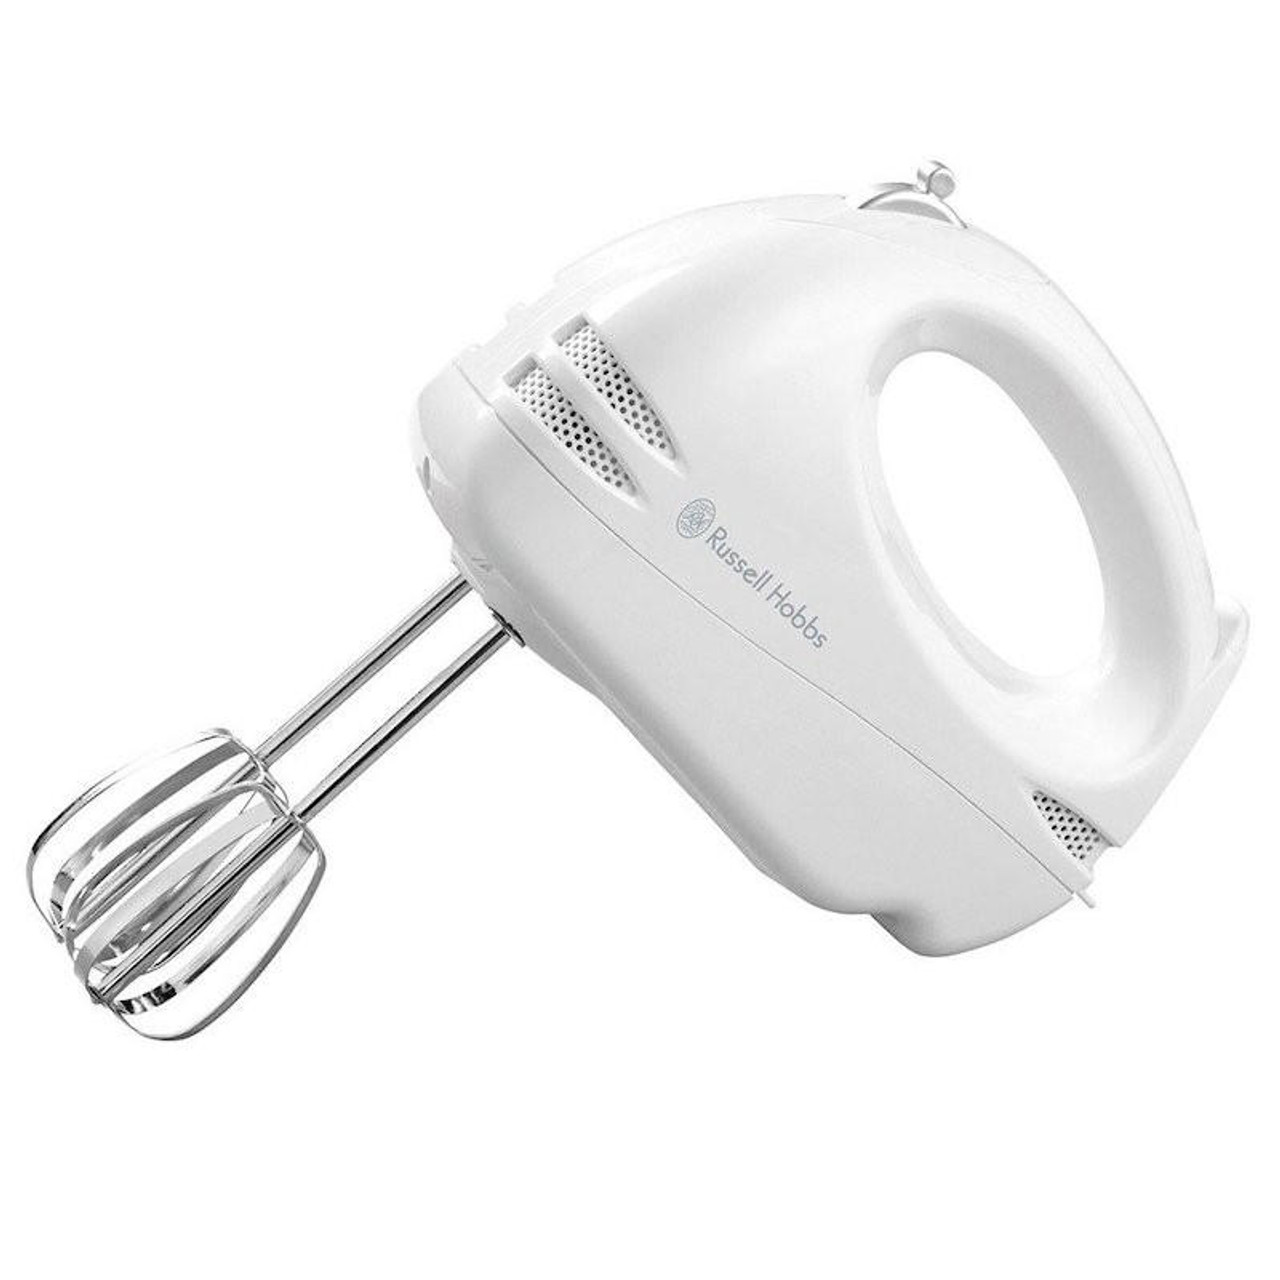 https://cdn11.bigcommerce.com/s-8ek7z3h3jn/images/stencil/1280x1280/products/3875/27095/russell-hobbs-food-collection-6-speed-hand-mixer-or-14451__92840.1660063250.jpg?c=1